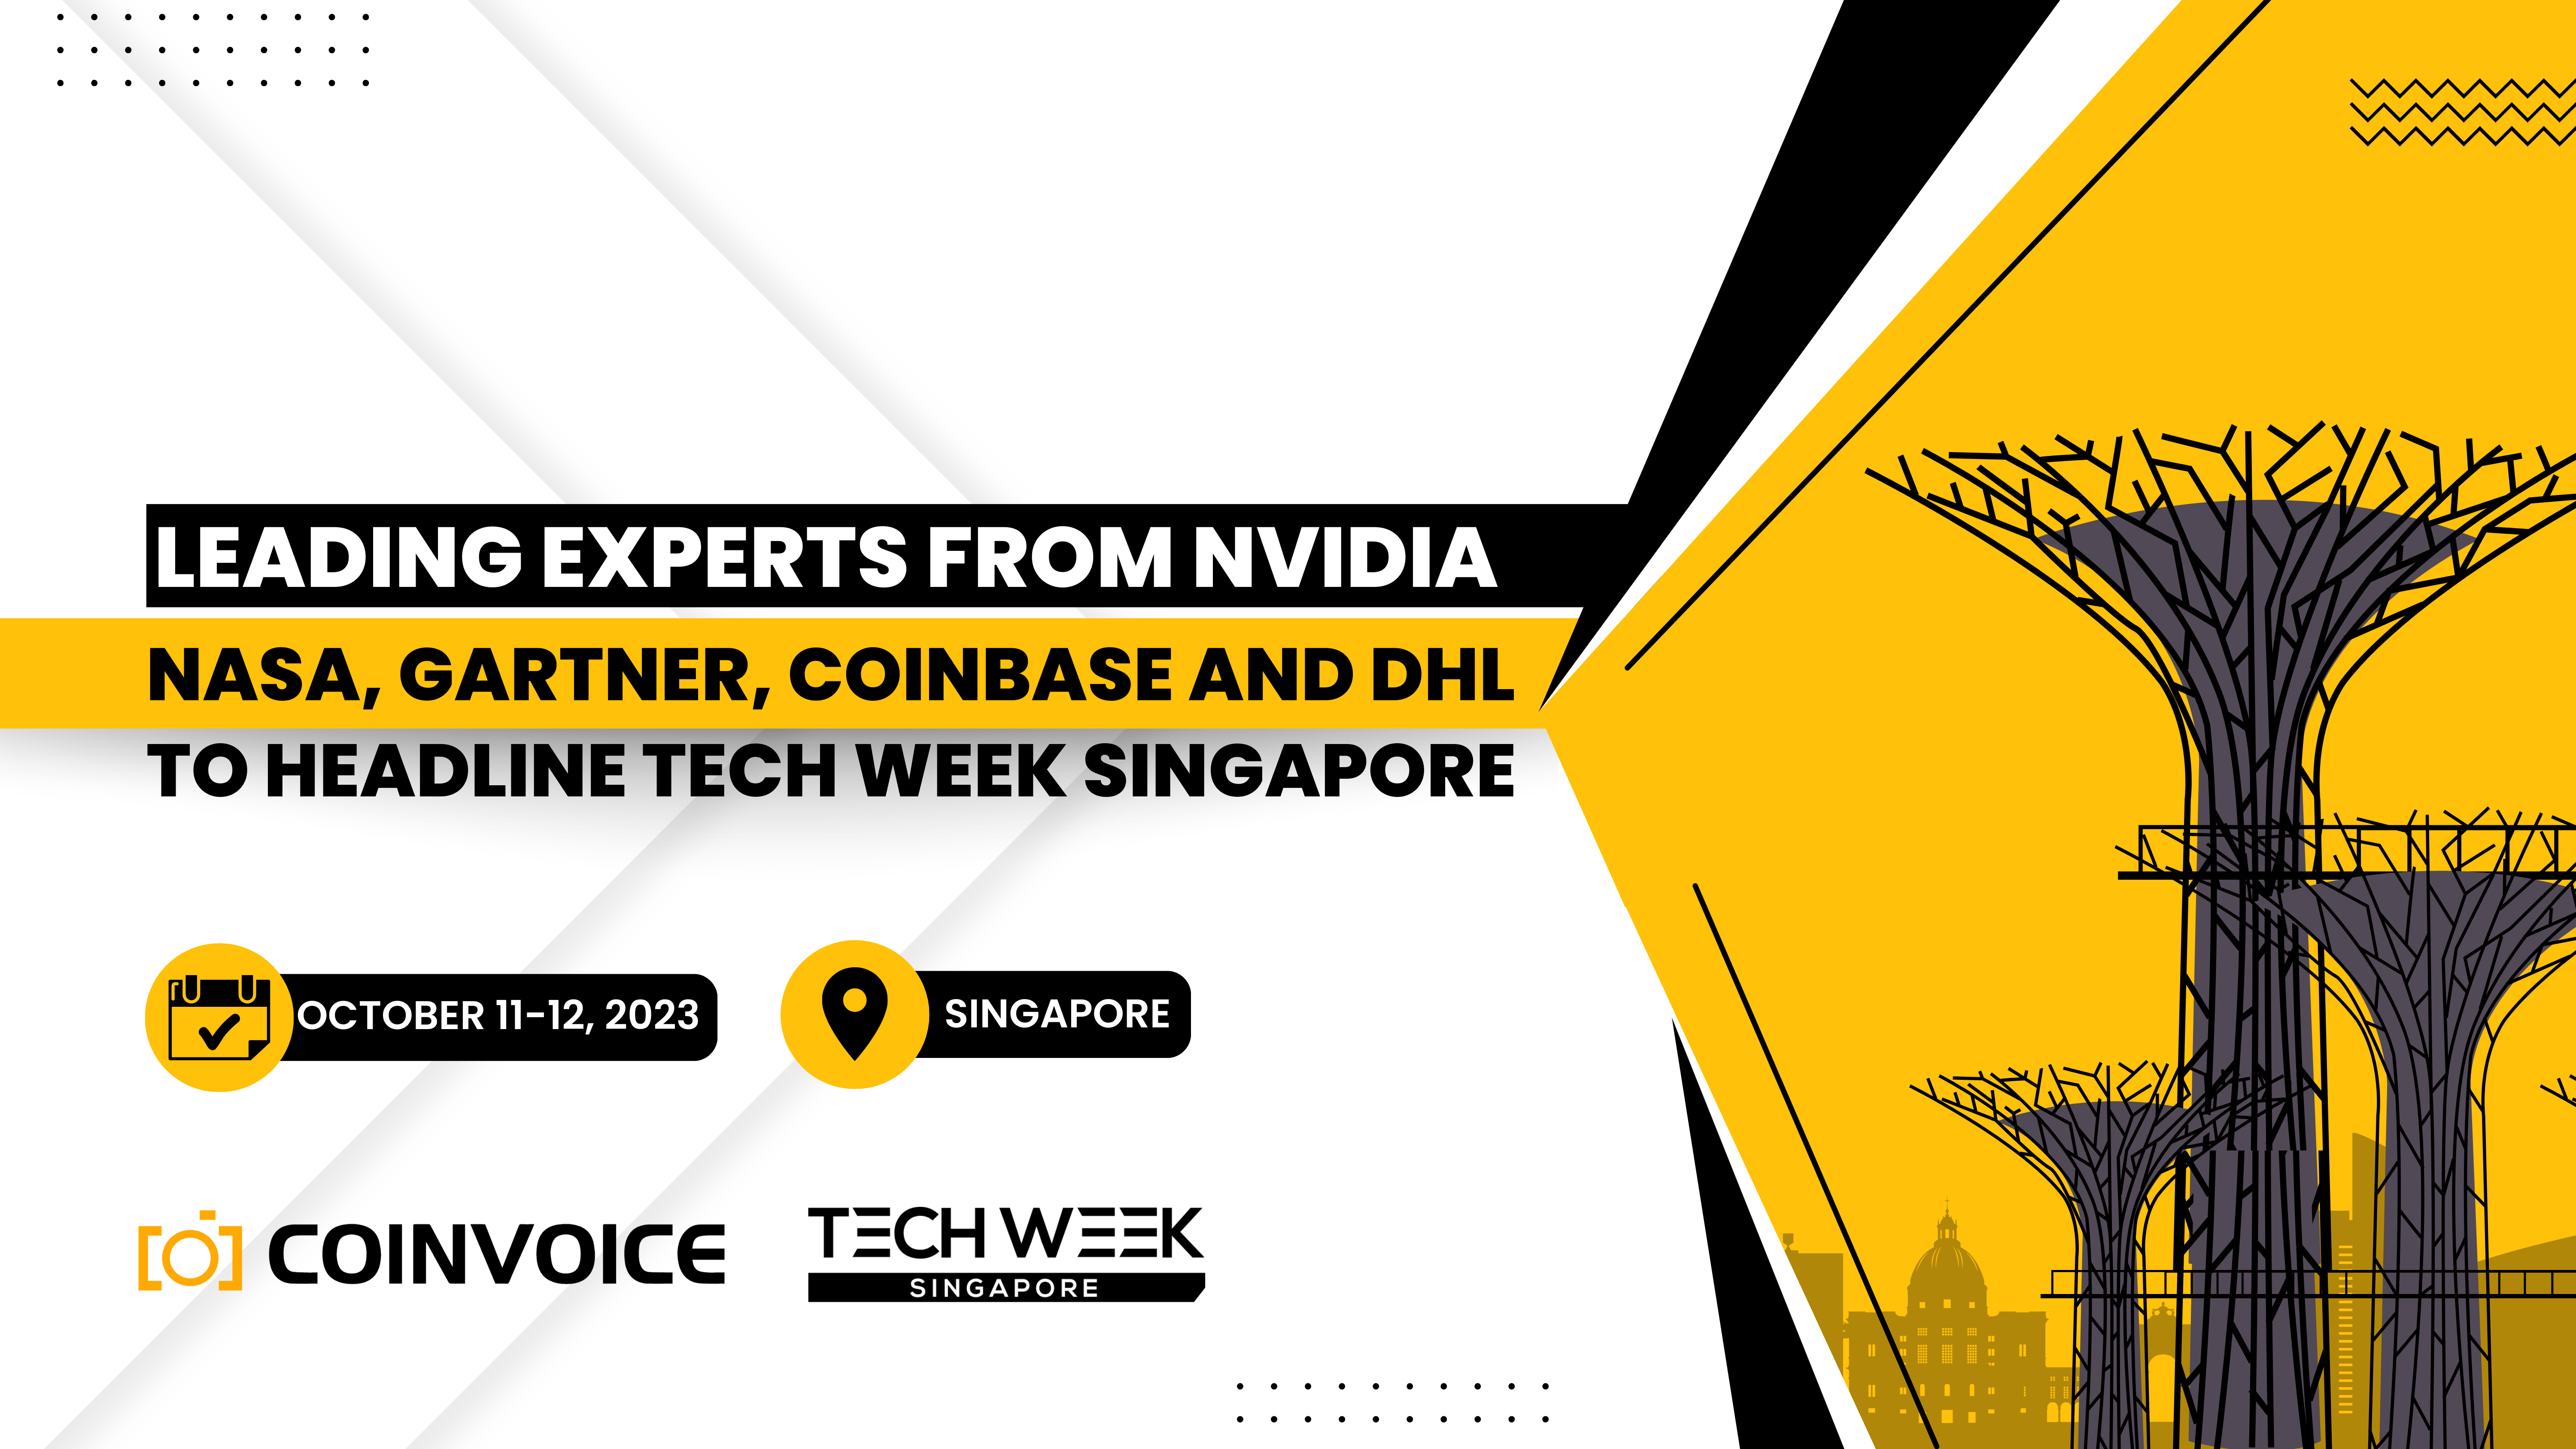 Leading Experts from NVIDIA, NASA, Gartner, Coinbase and DHL to Headline Tech Week Singapore in October